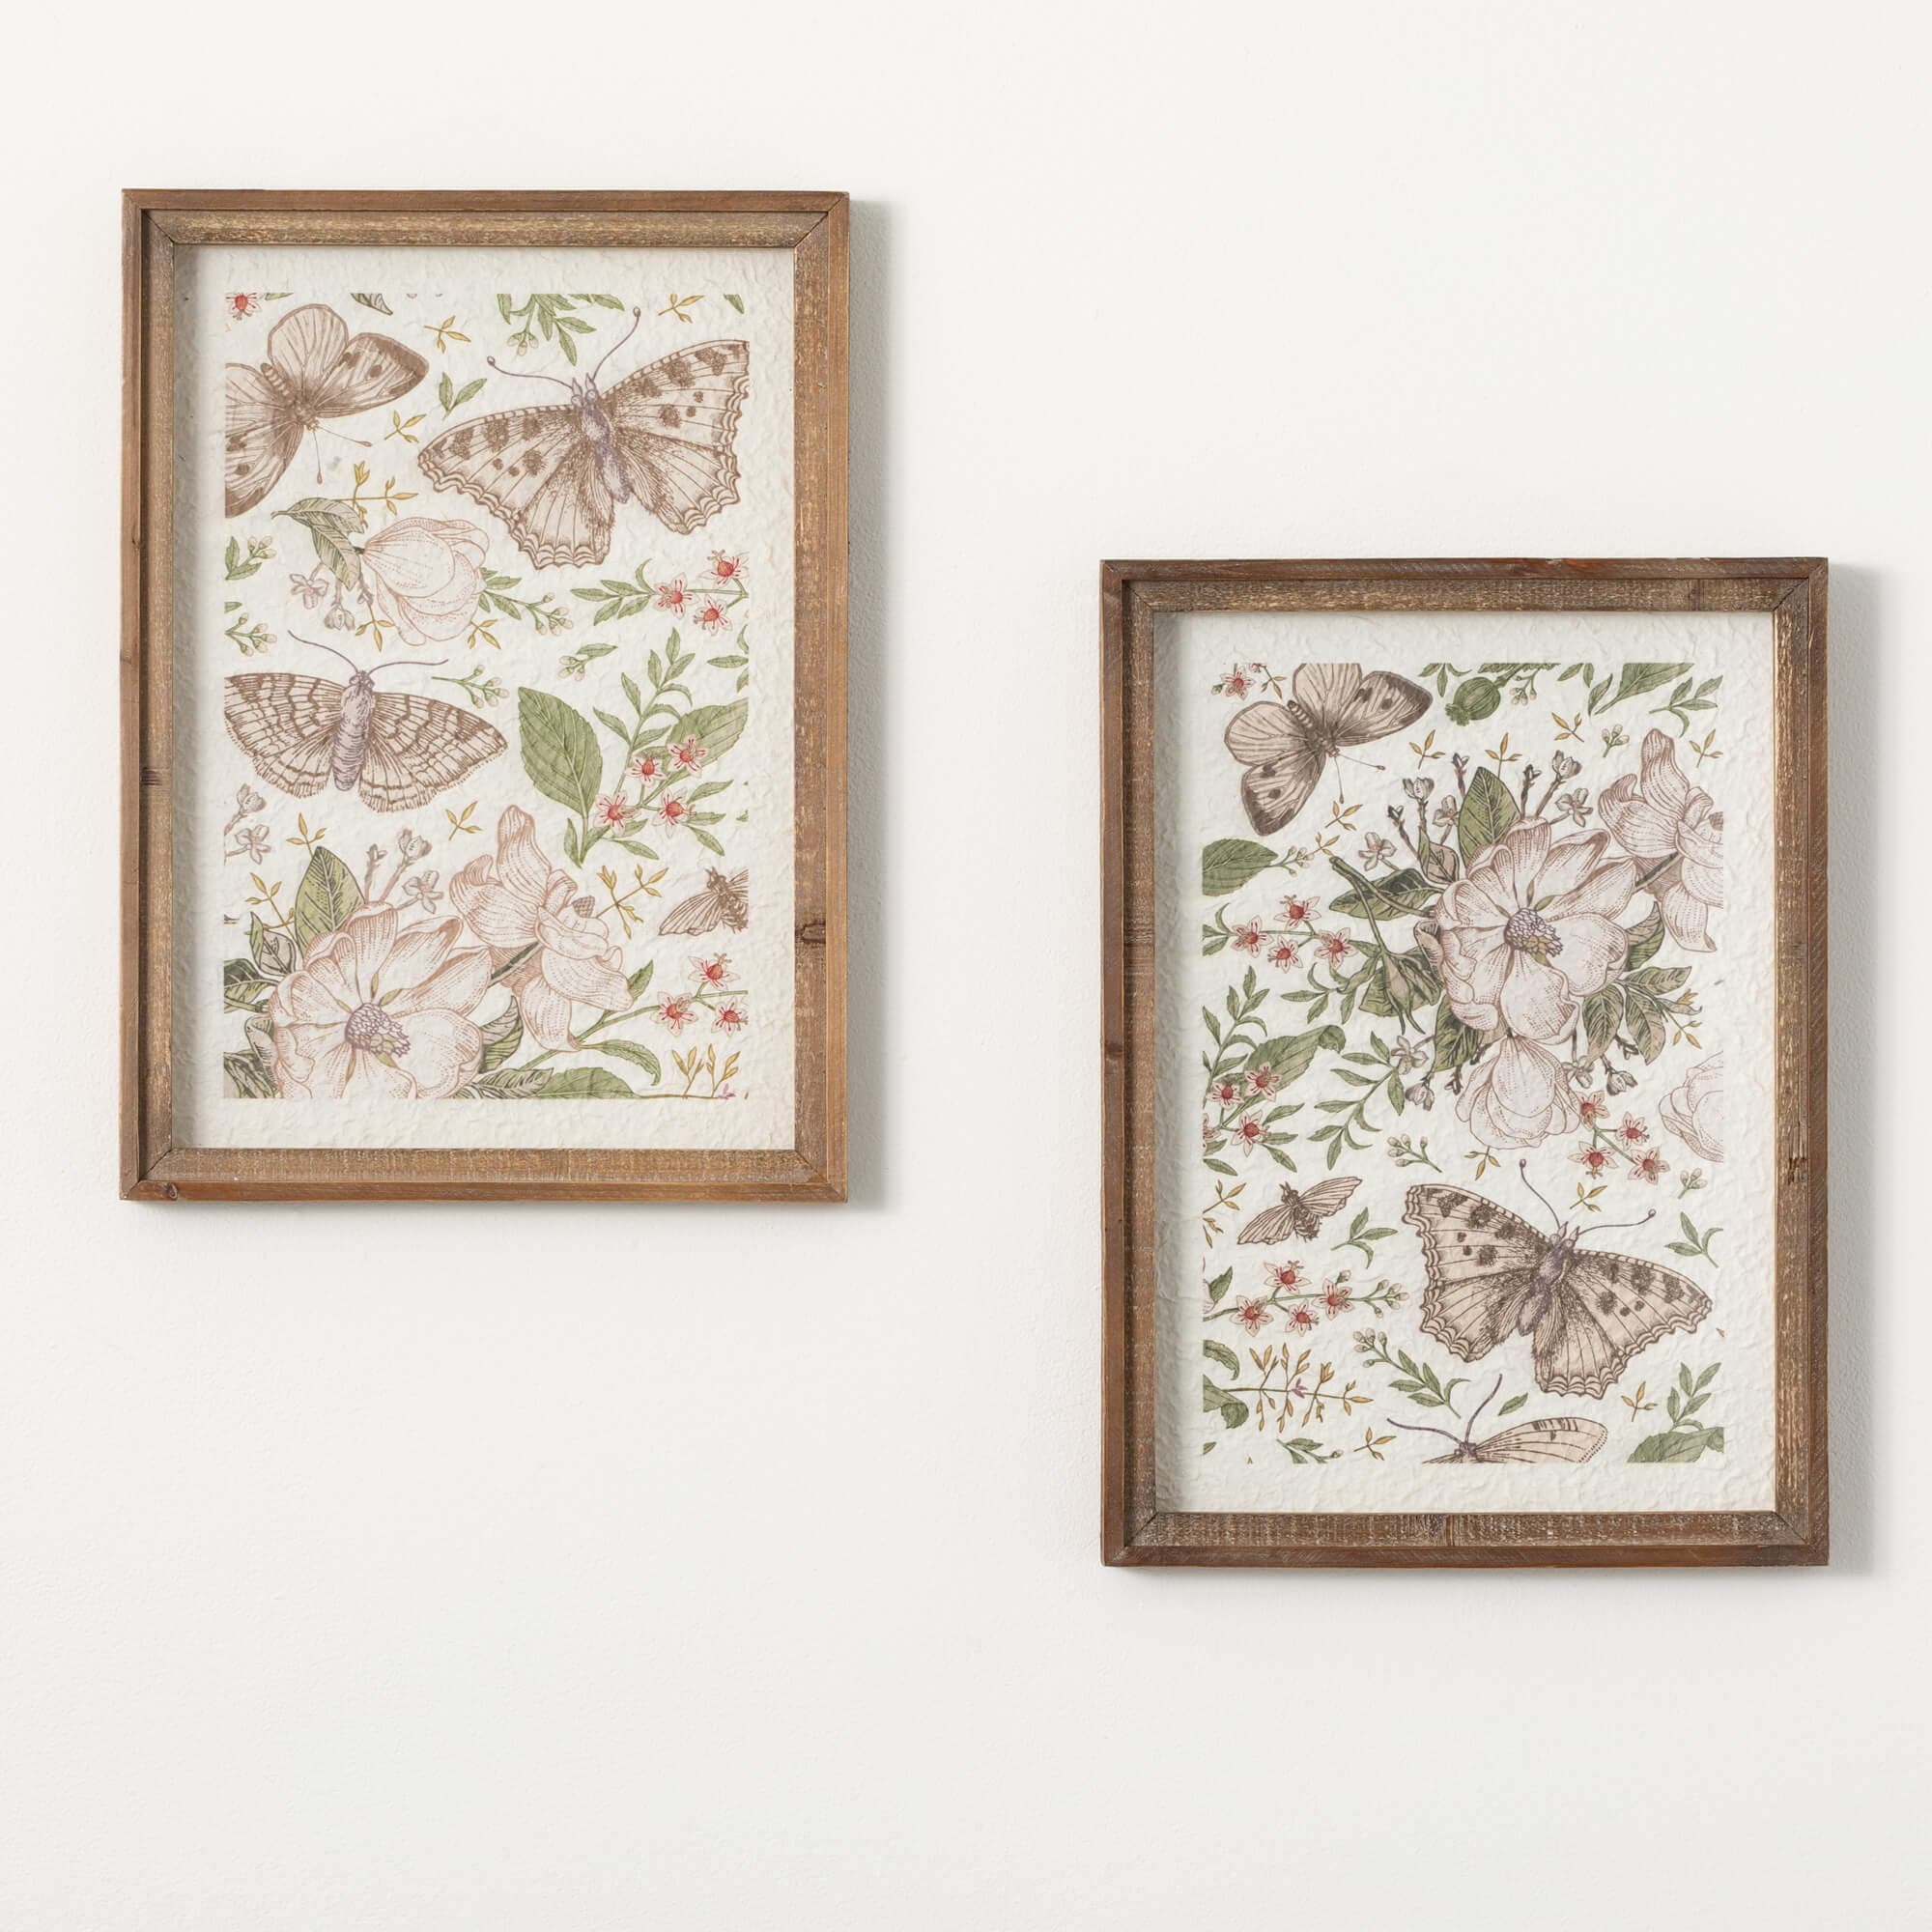 Retro Butterfly Wall Art Duo Elevate Home Decor - Wall Decor